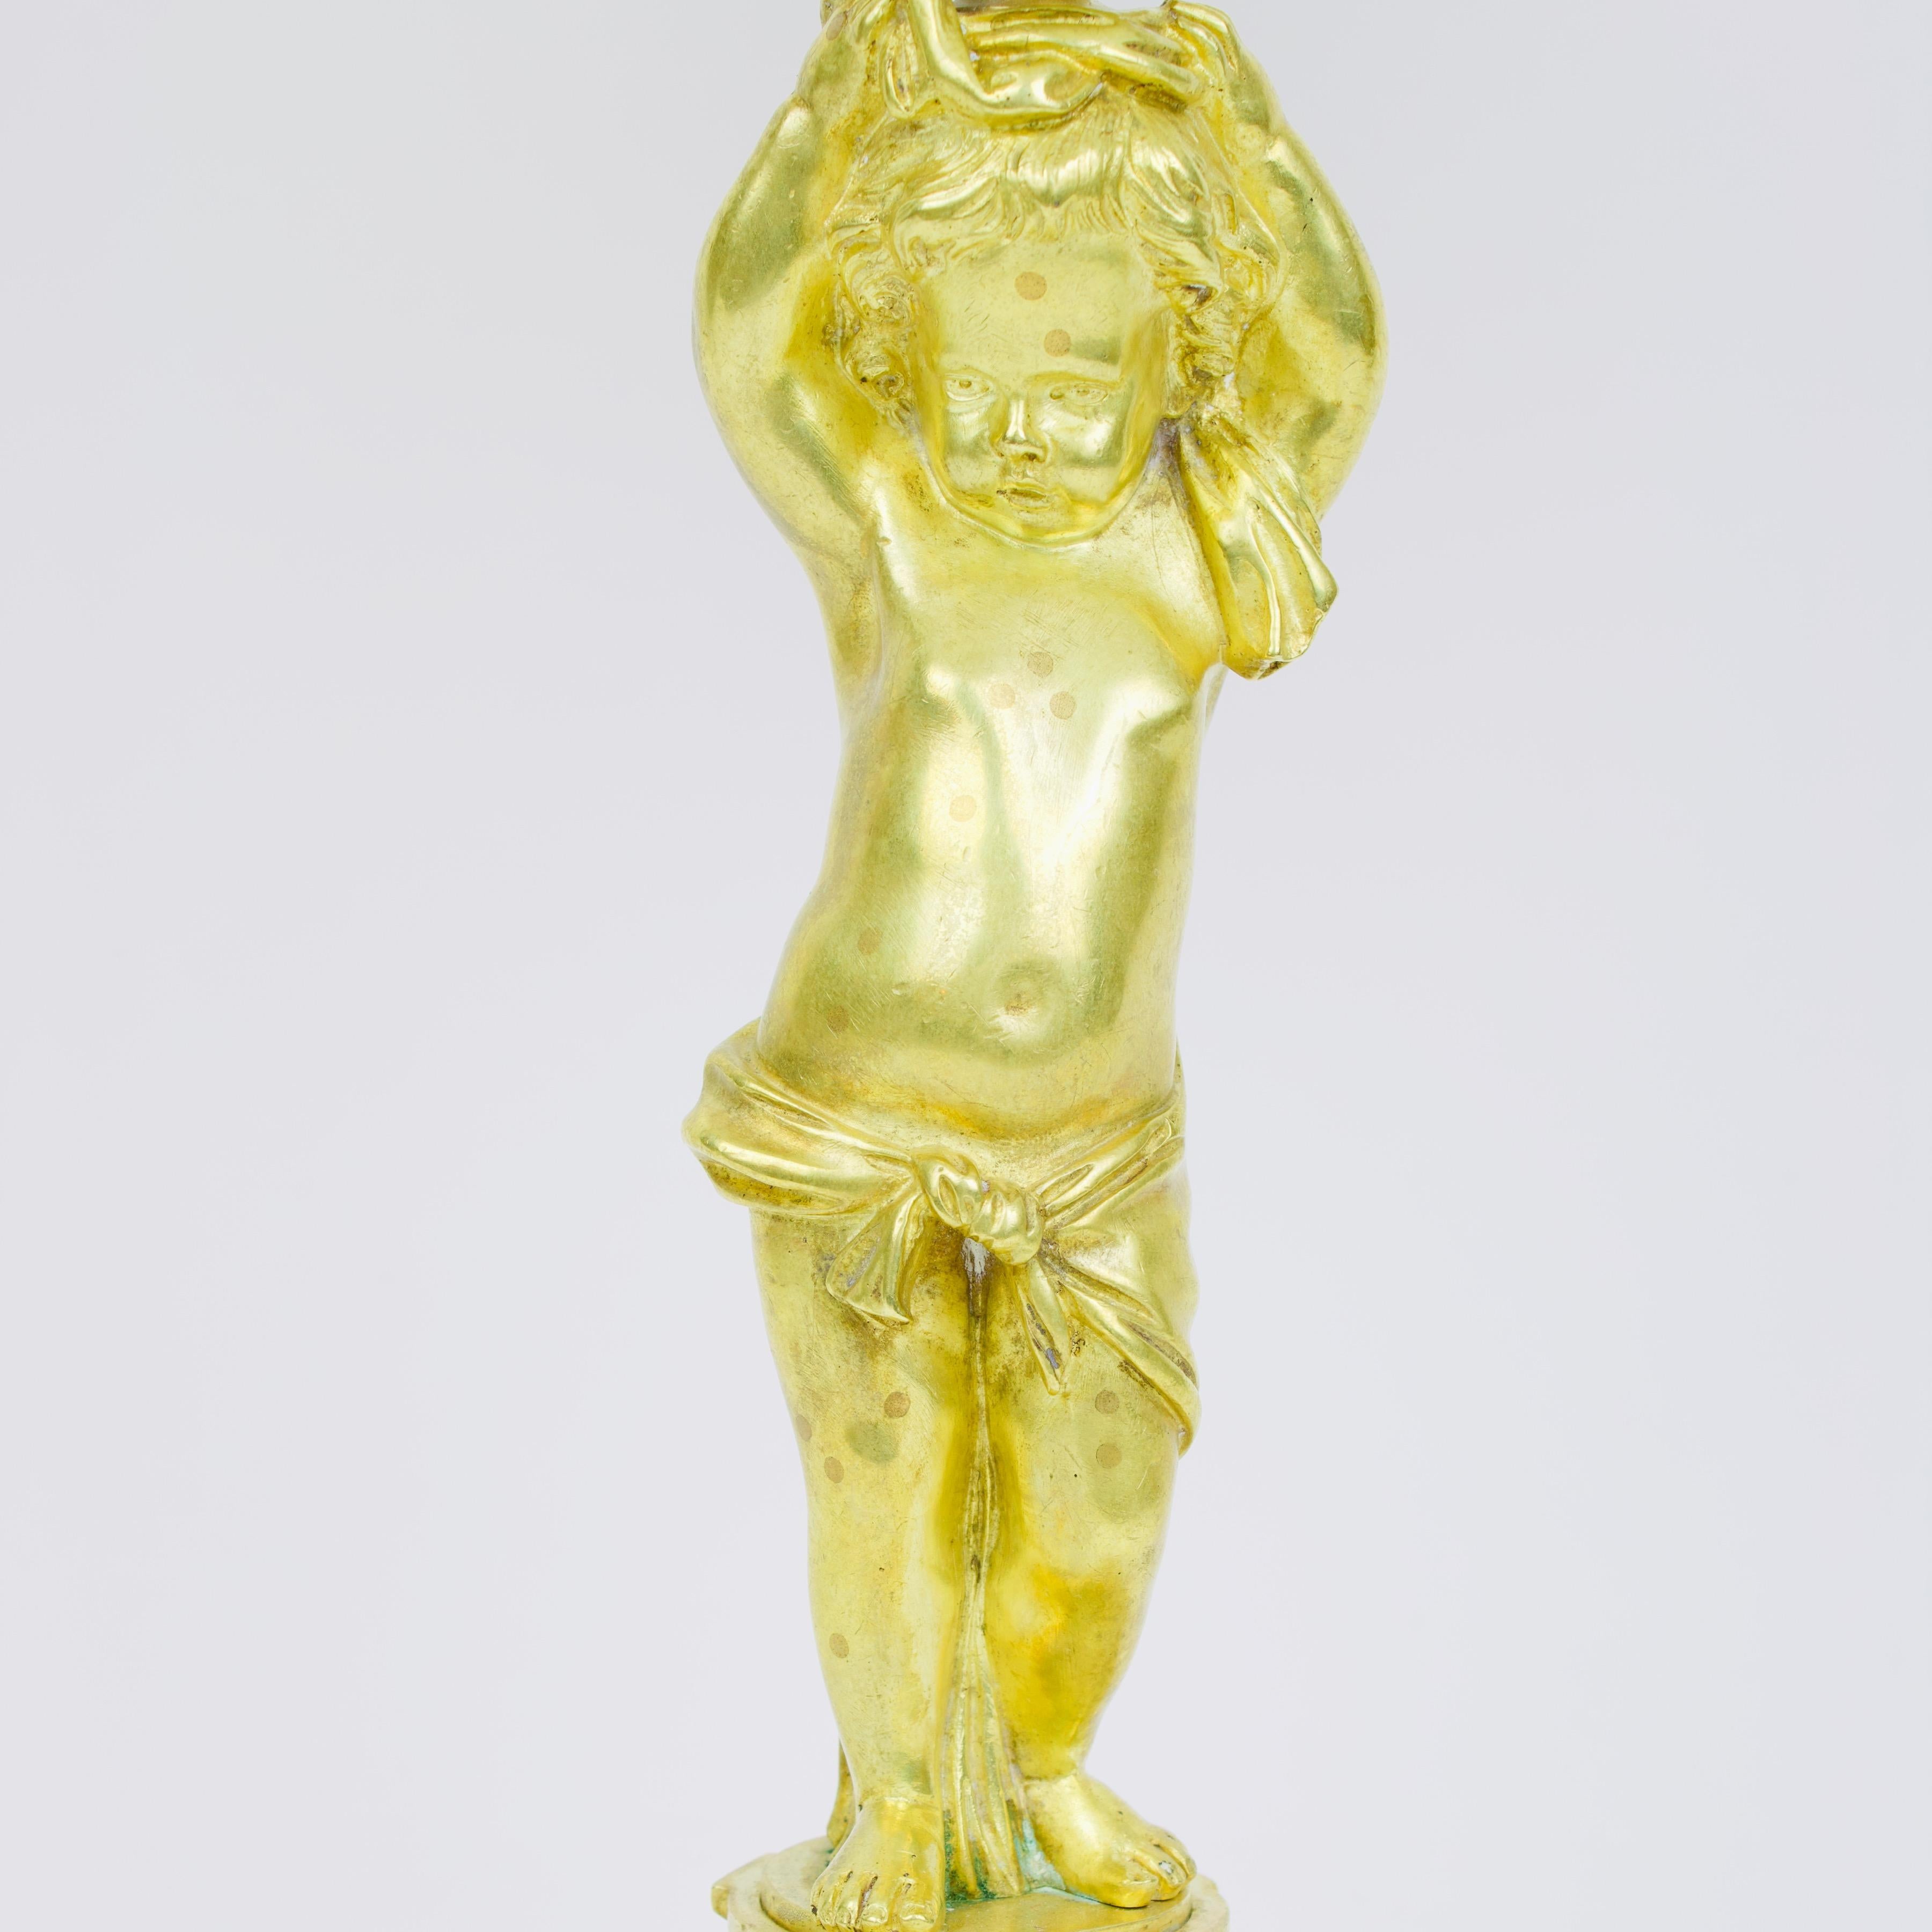 19th Century French Louis XVI porcelain and gilt bronze Putto figure Tazza 

Standing on a circular base featuring neoclassical Louis XVI ornamentation a putto figure with a cloth draped around his hips and holding his arms up in the air. From his